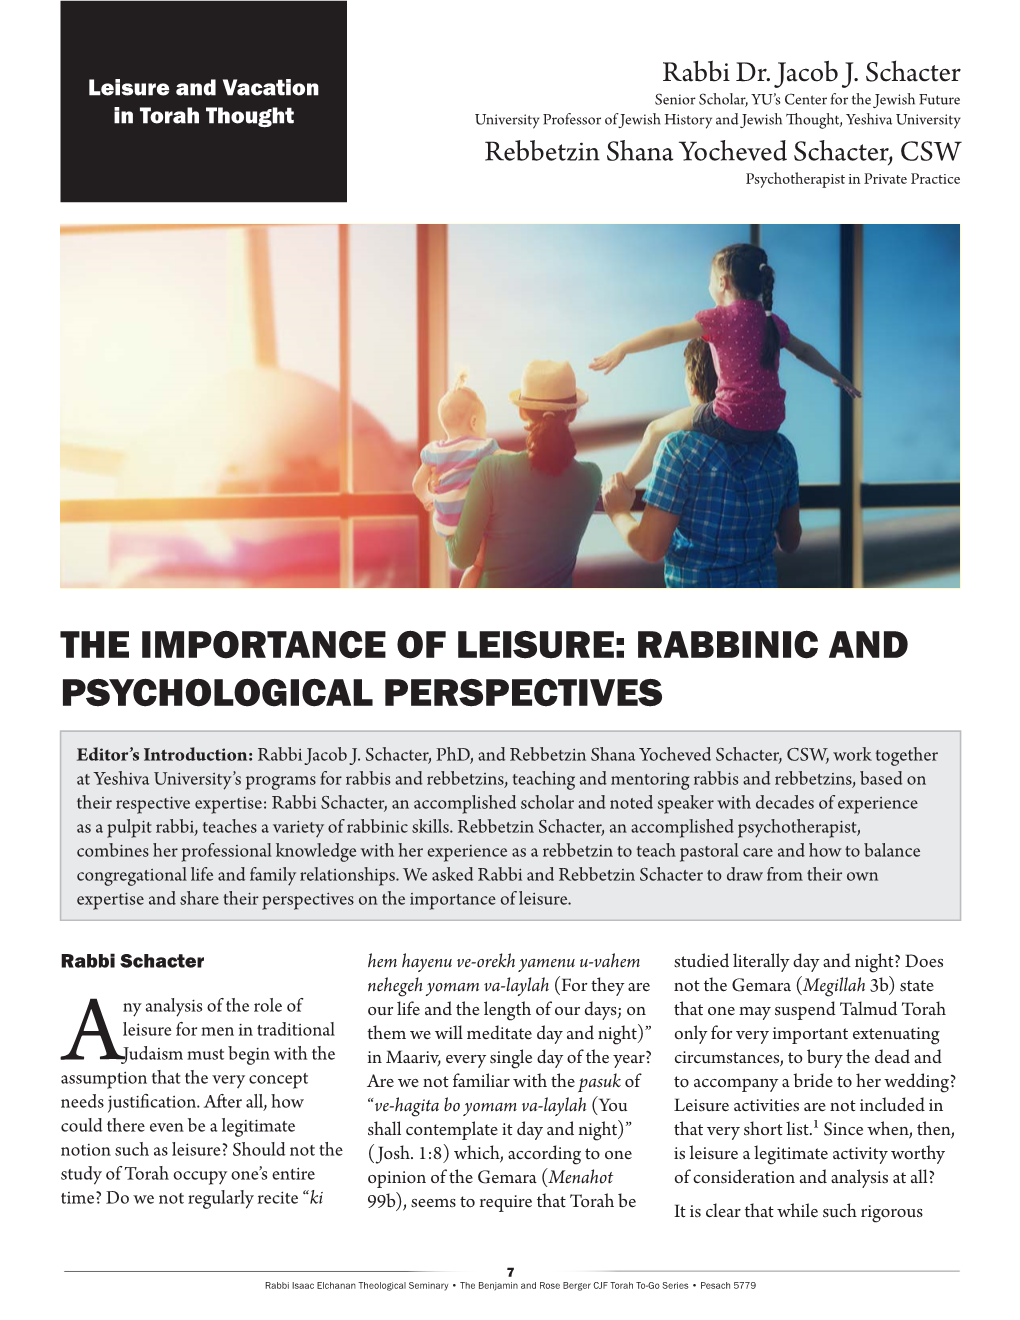 The Importance of Leisure: Rabbinic and Psychological Perspectives